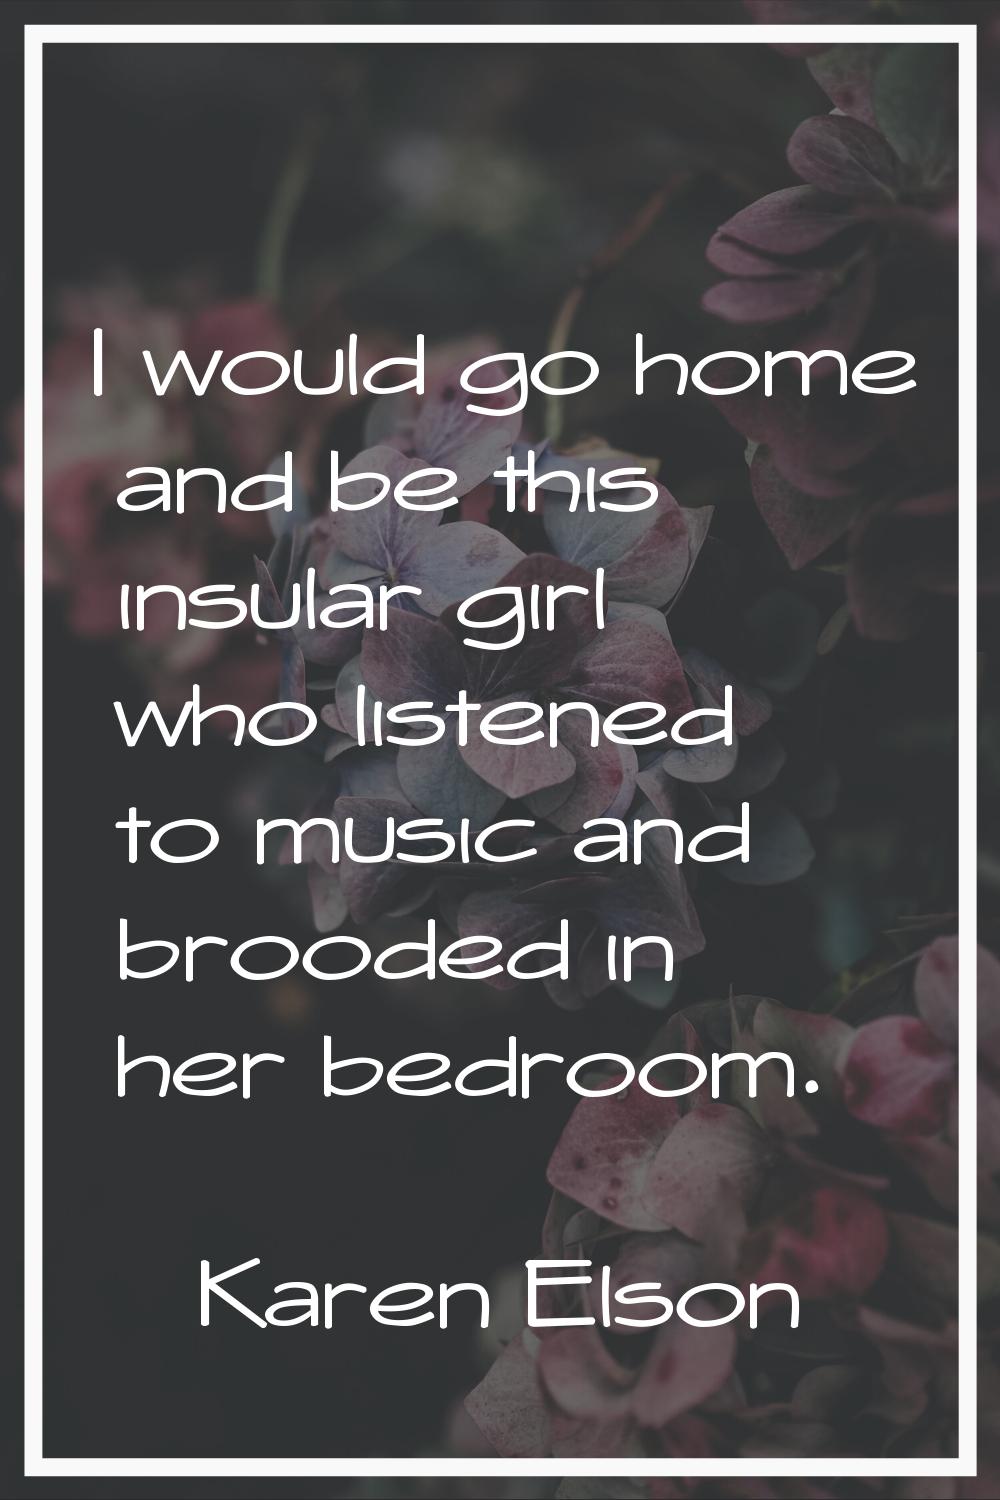 I would go home and be this insular girl who listened to music and brooded in her bedroom.